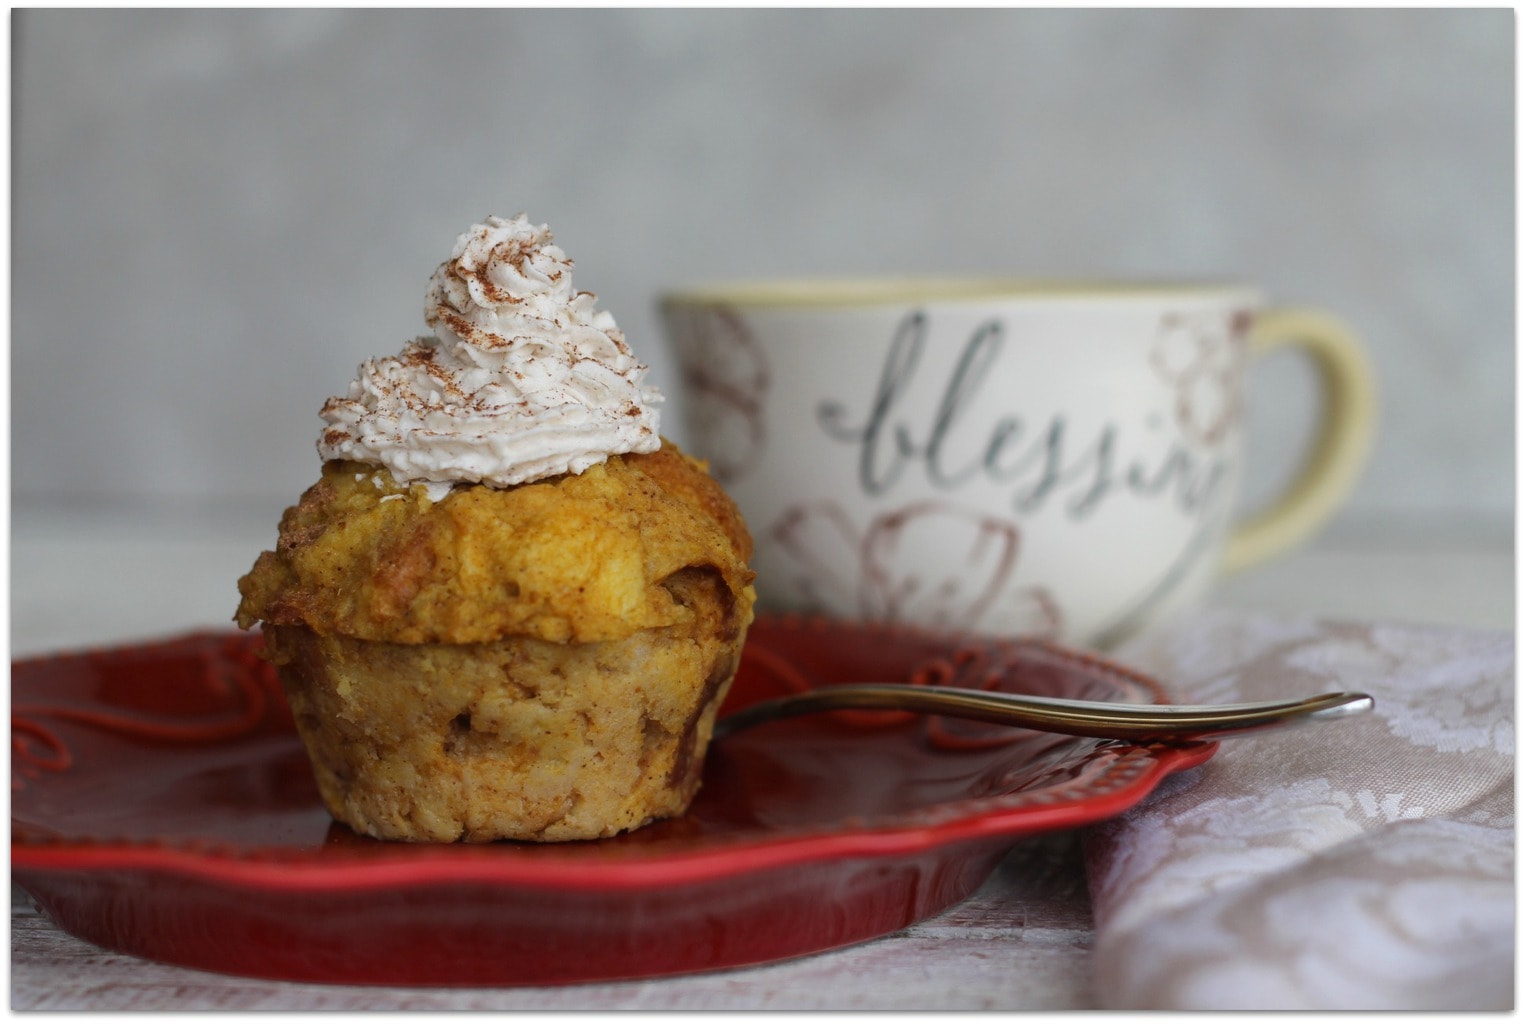 Who could resist Pumpkin Bread Pudding with freshly made Pumpkin Spice Whipped Cream? 'Tis the season for pumpkin, though I love it all year long!